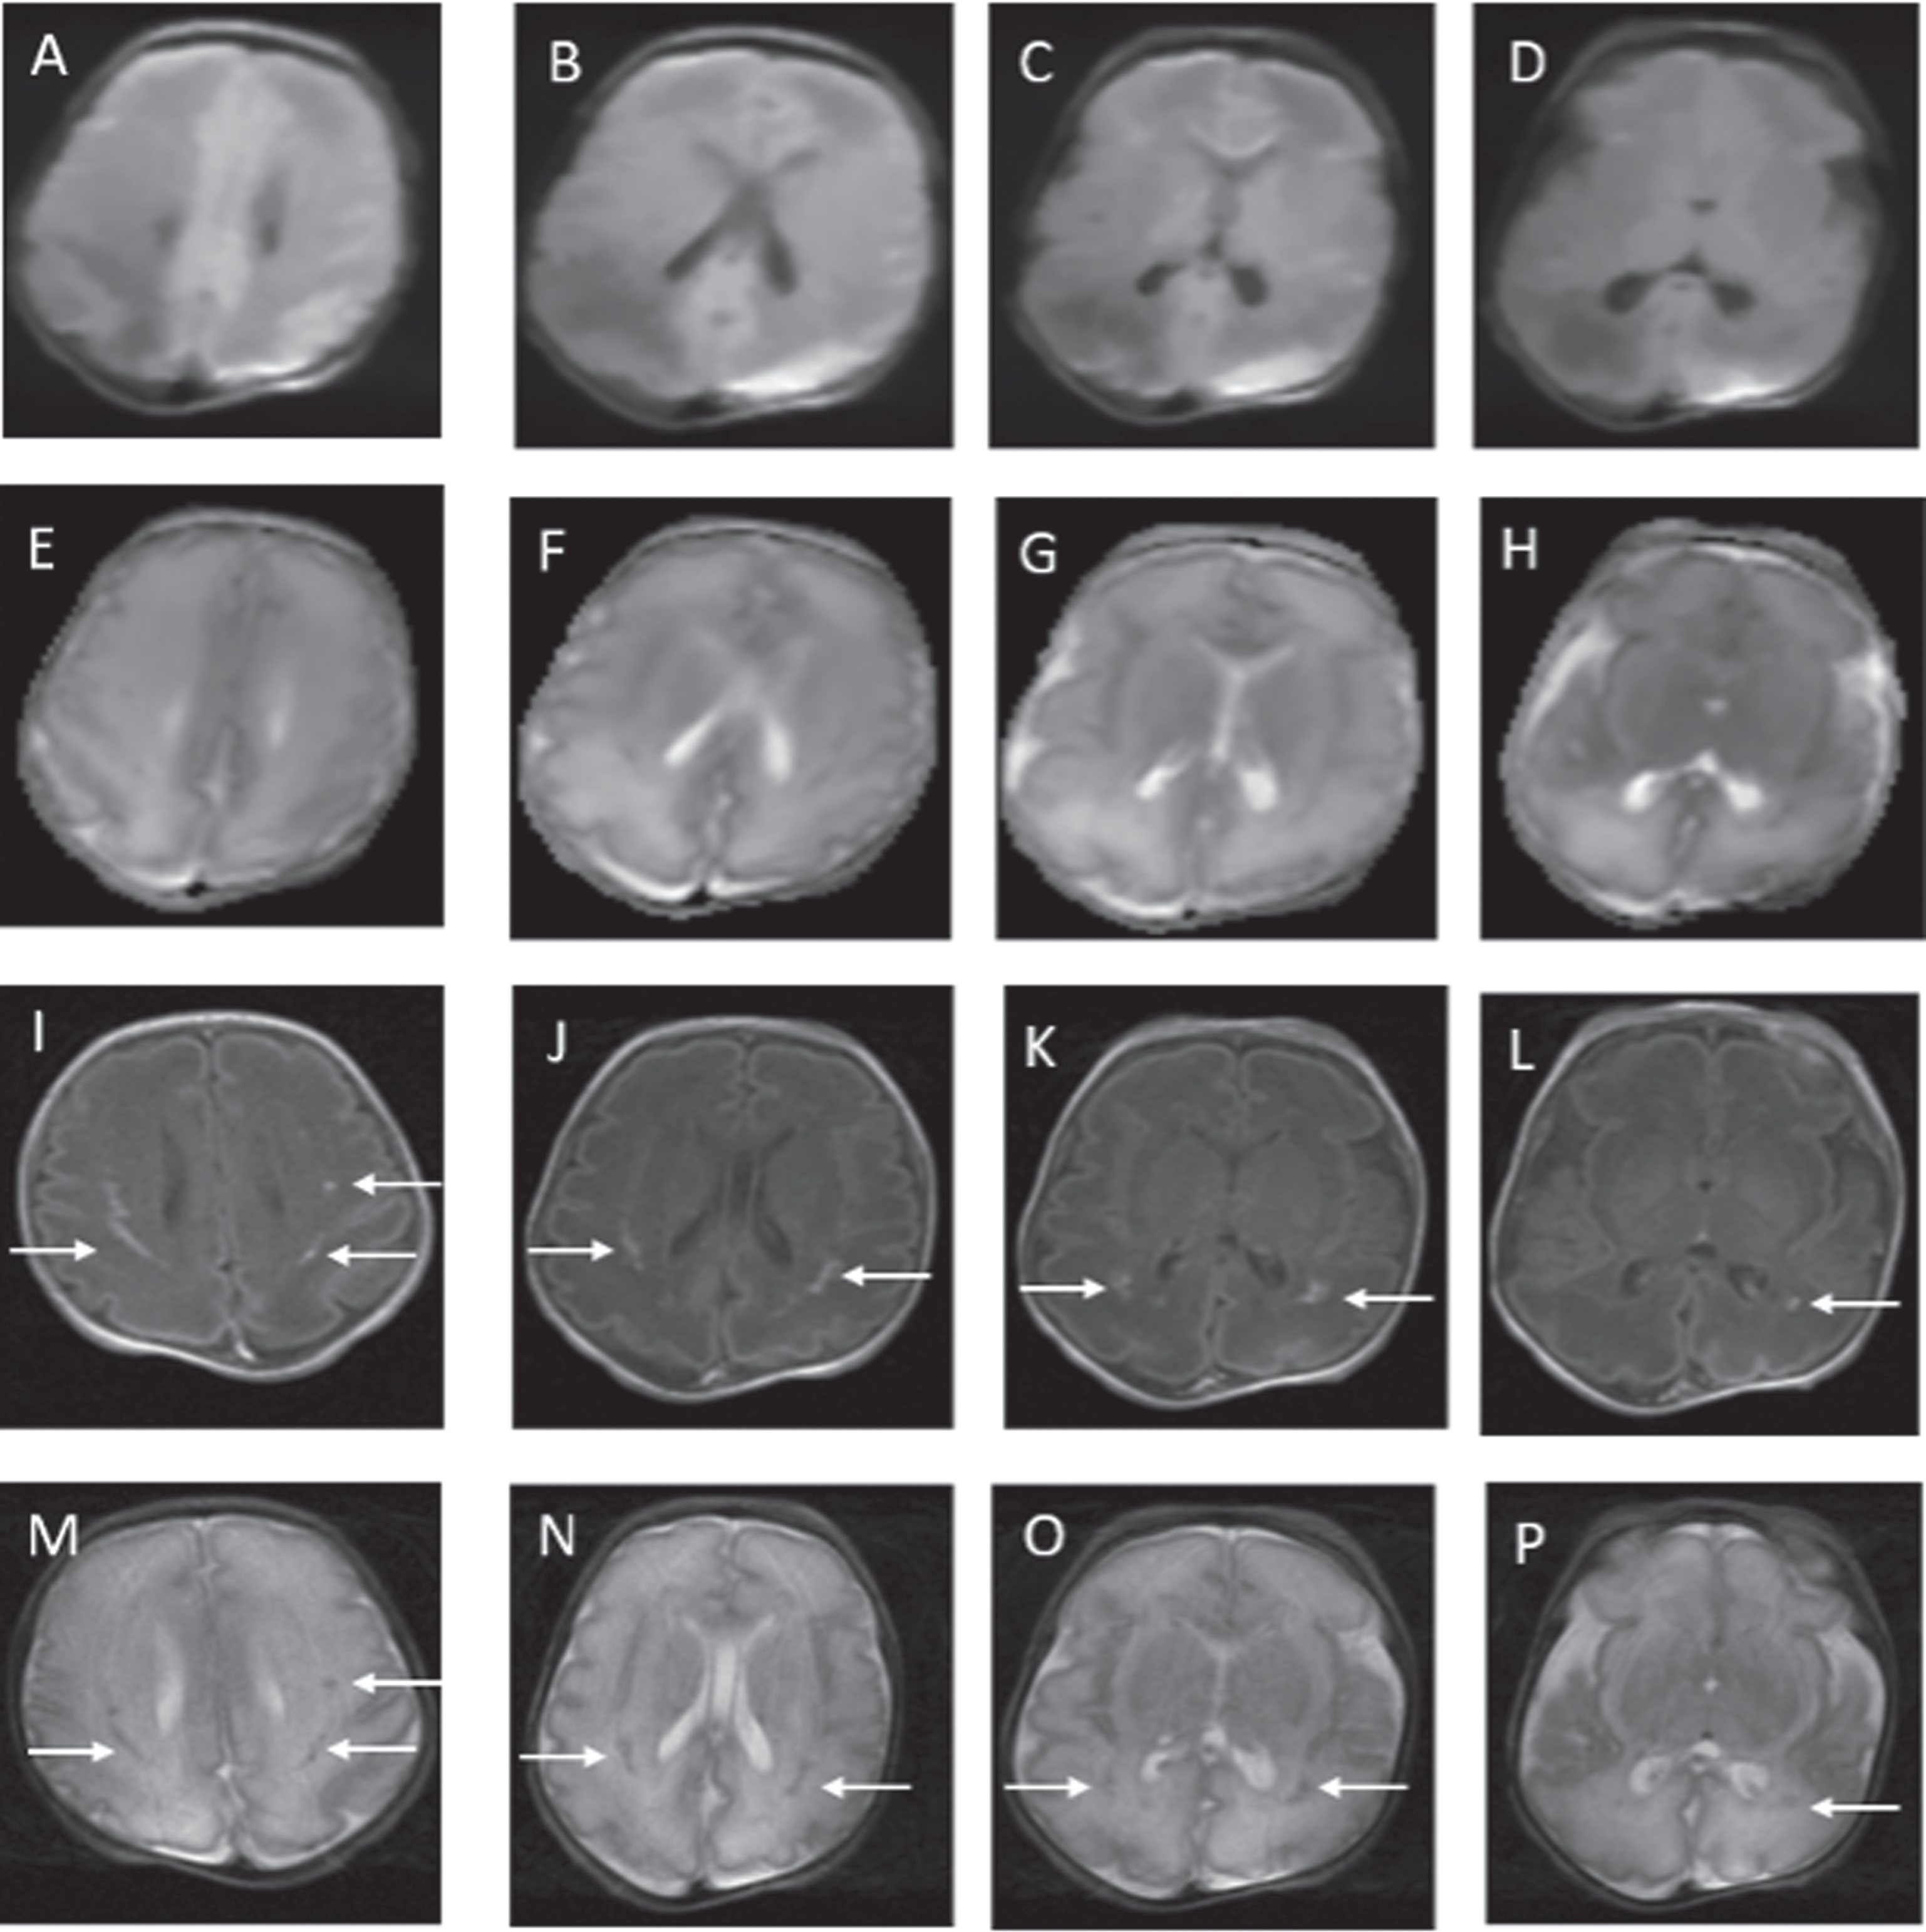 MRI findings on postnatal day 12. Previously seen abnormalities on DWI and ADC have resolved (A to H). White matter injury now more evident on axial T1 (I to L) and axial T2 (M to P) images.